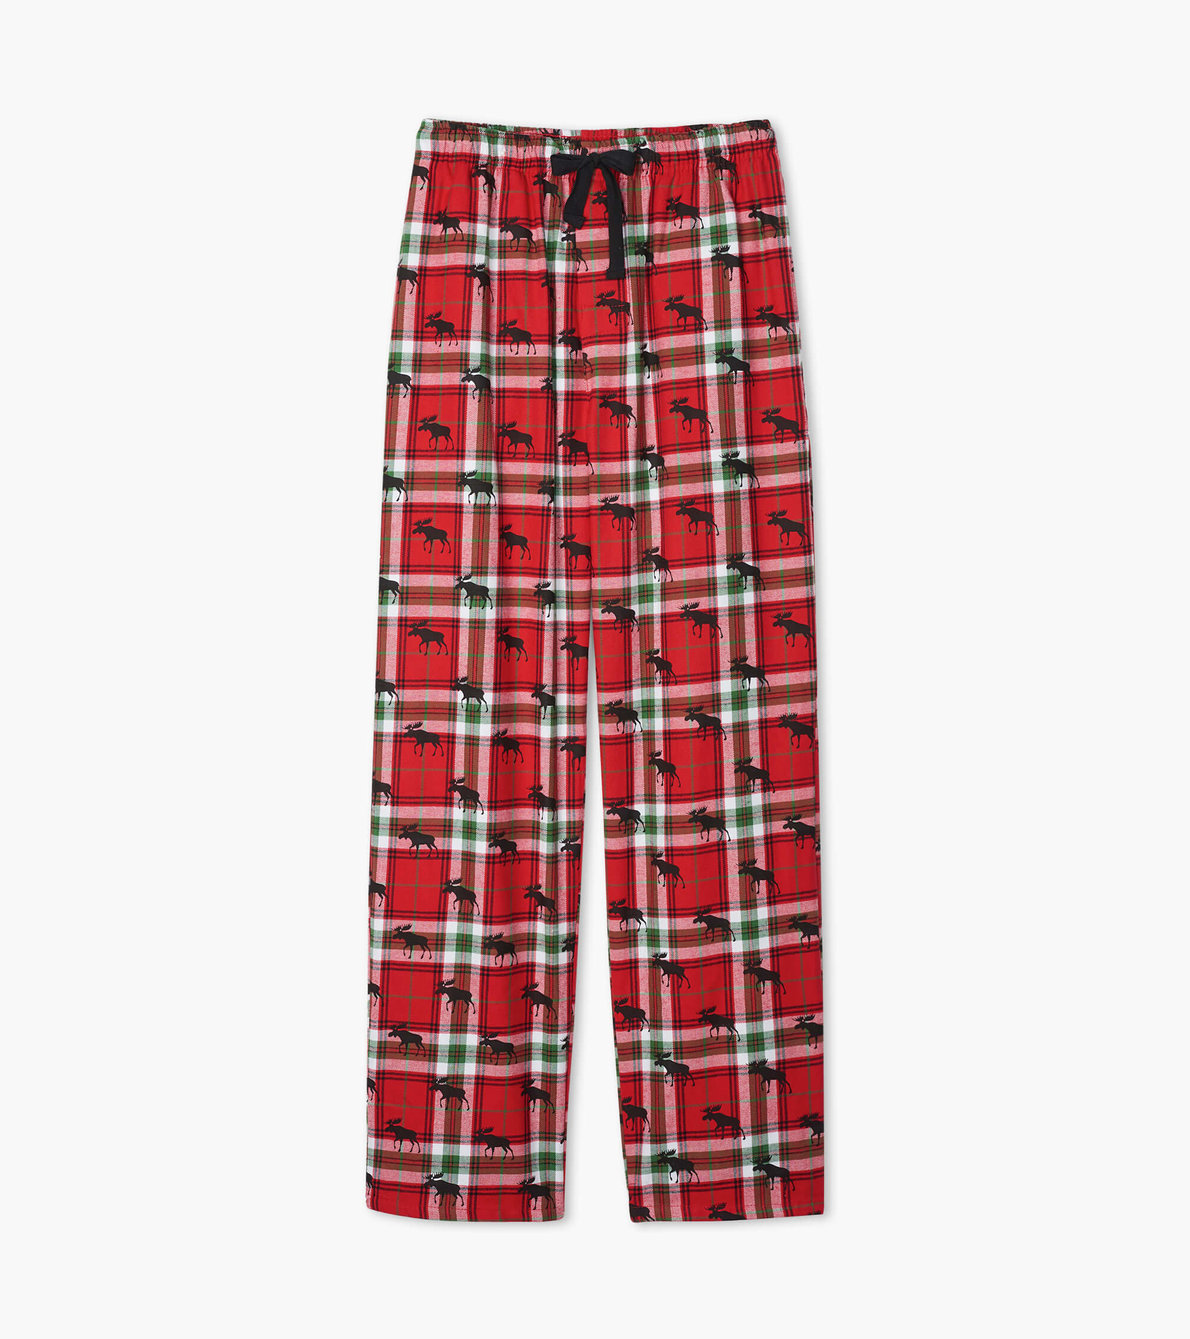 View larger image of Holiday Moose on Plaid Men's Flannel Pajama Pants